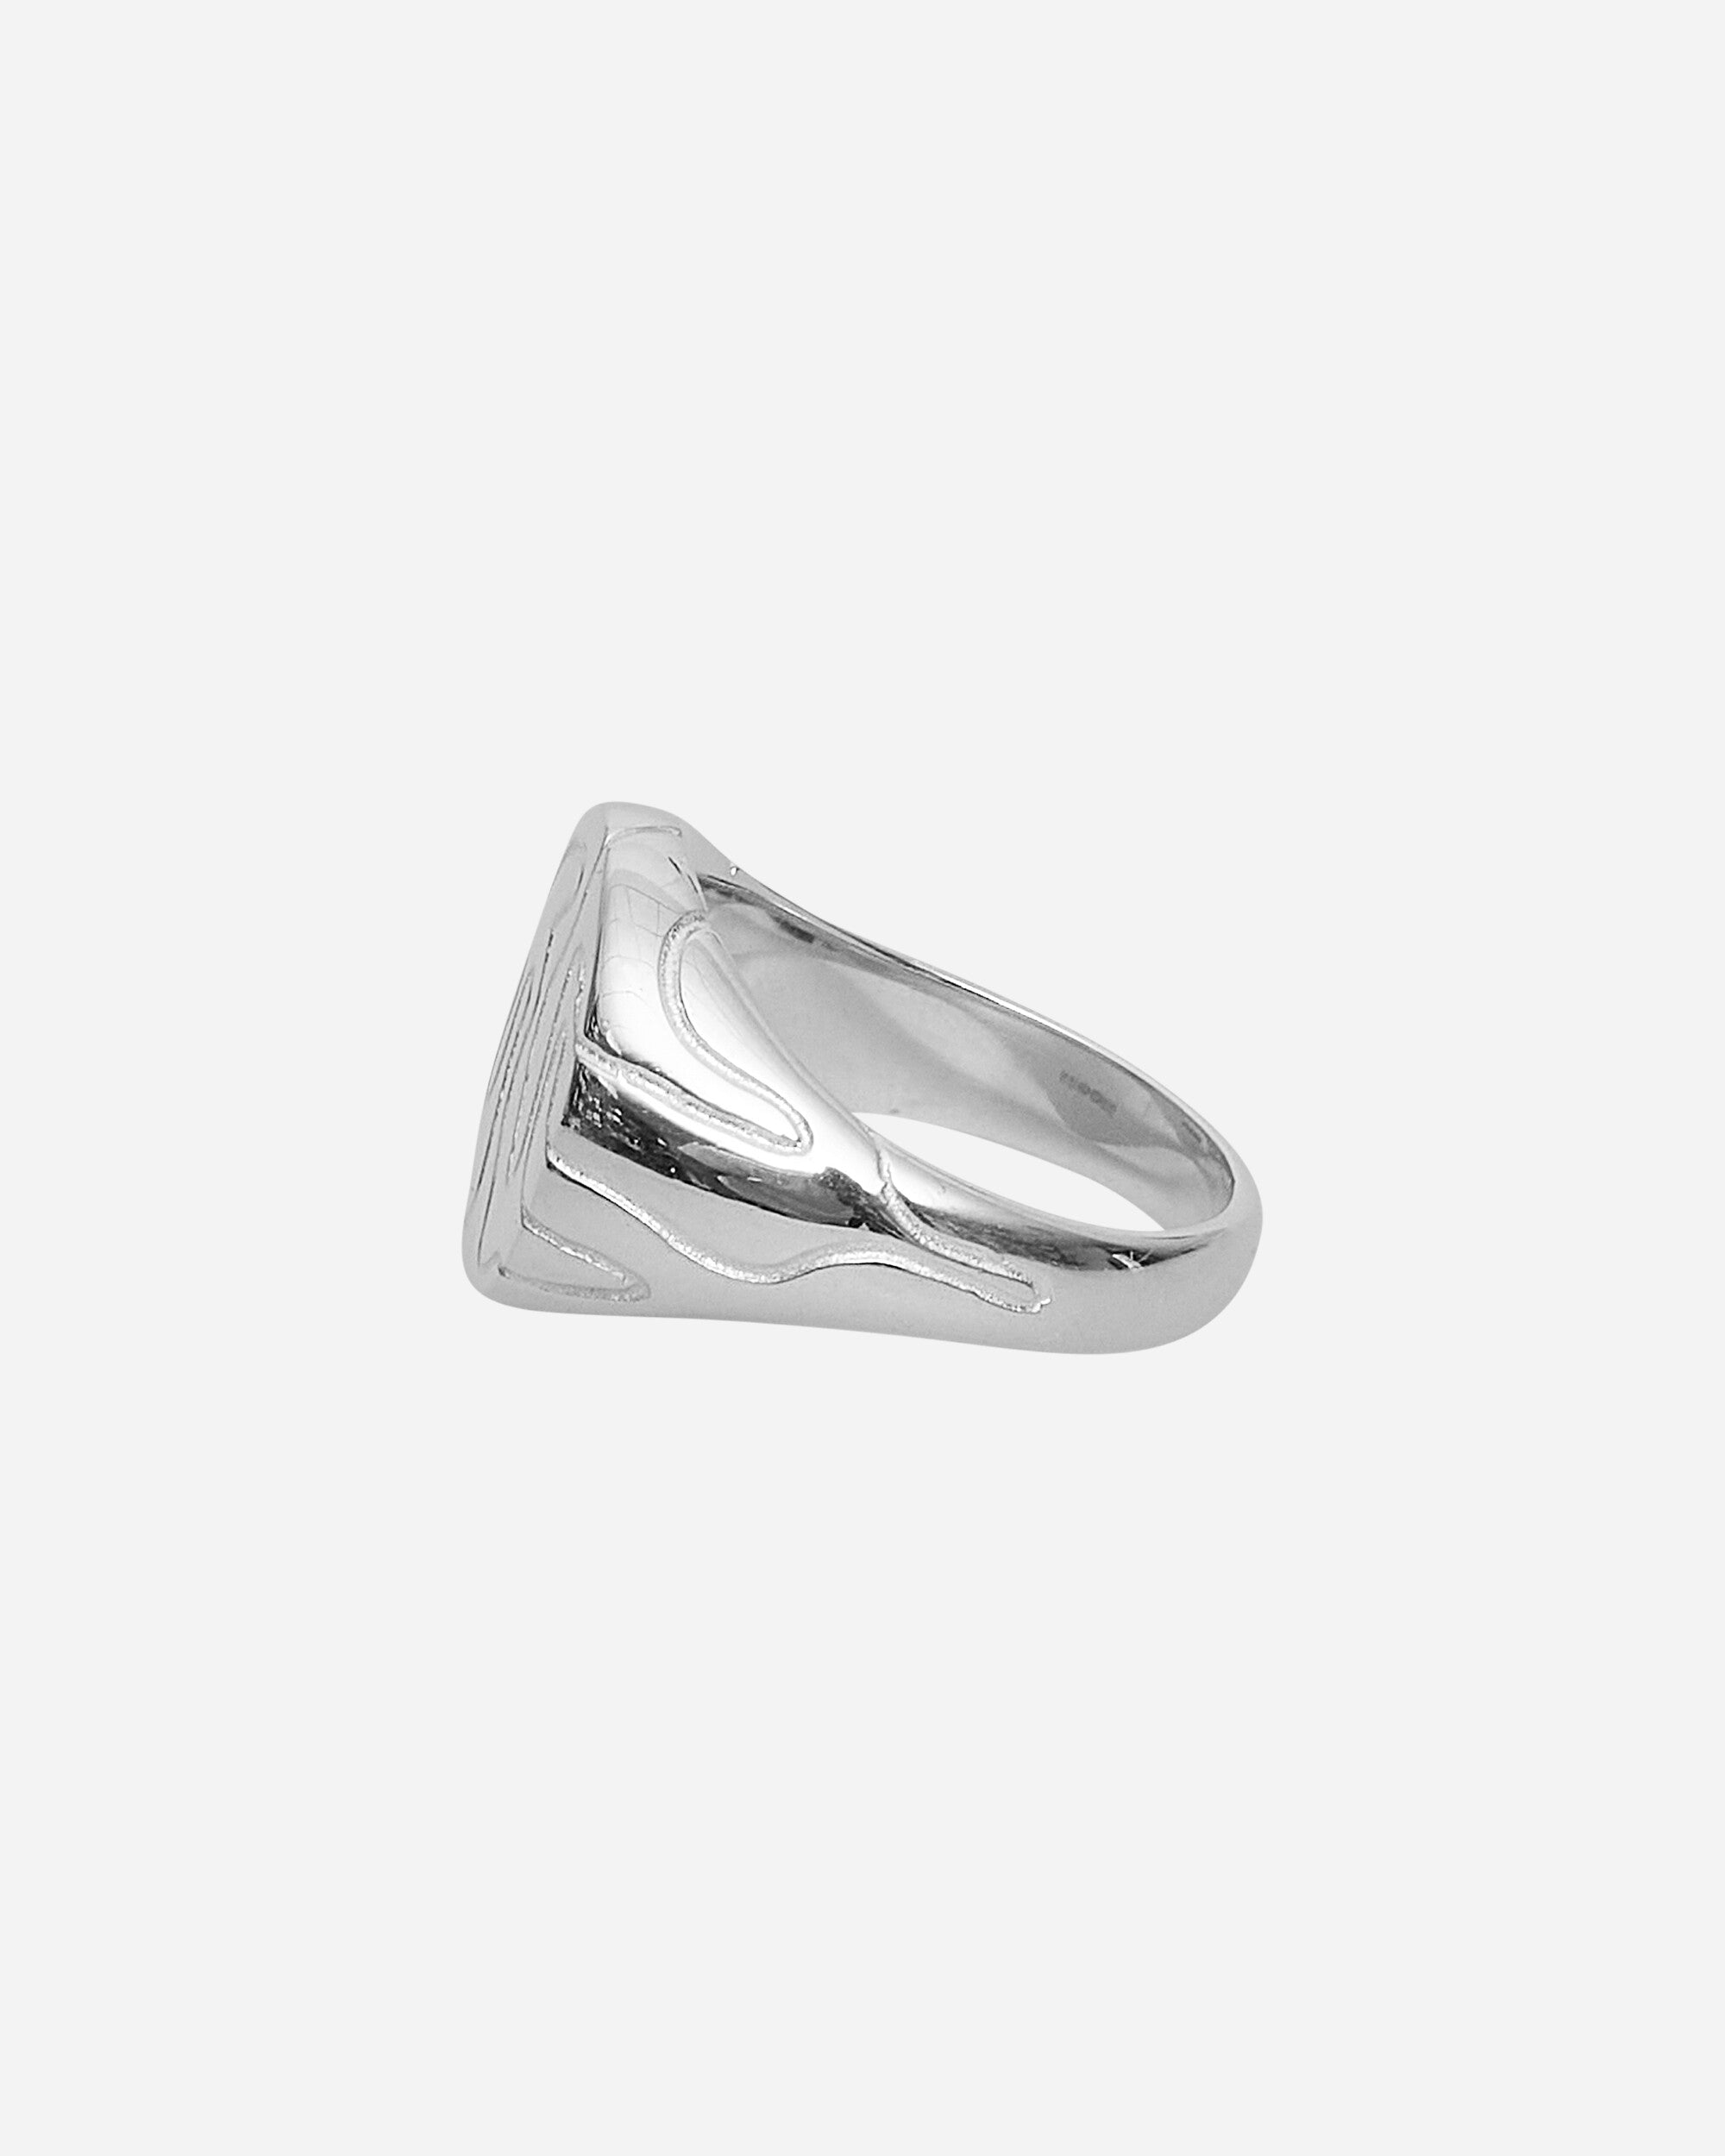 Octi Topology Signet Silver Jewellery Rings TPS 001